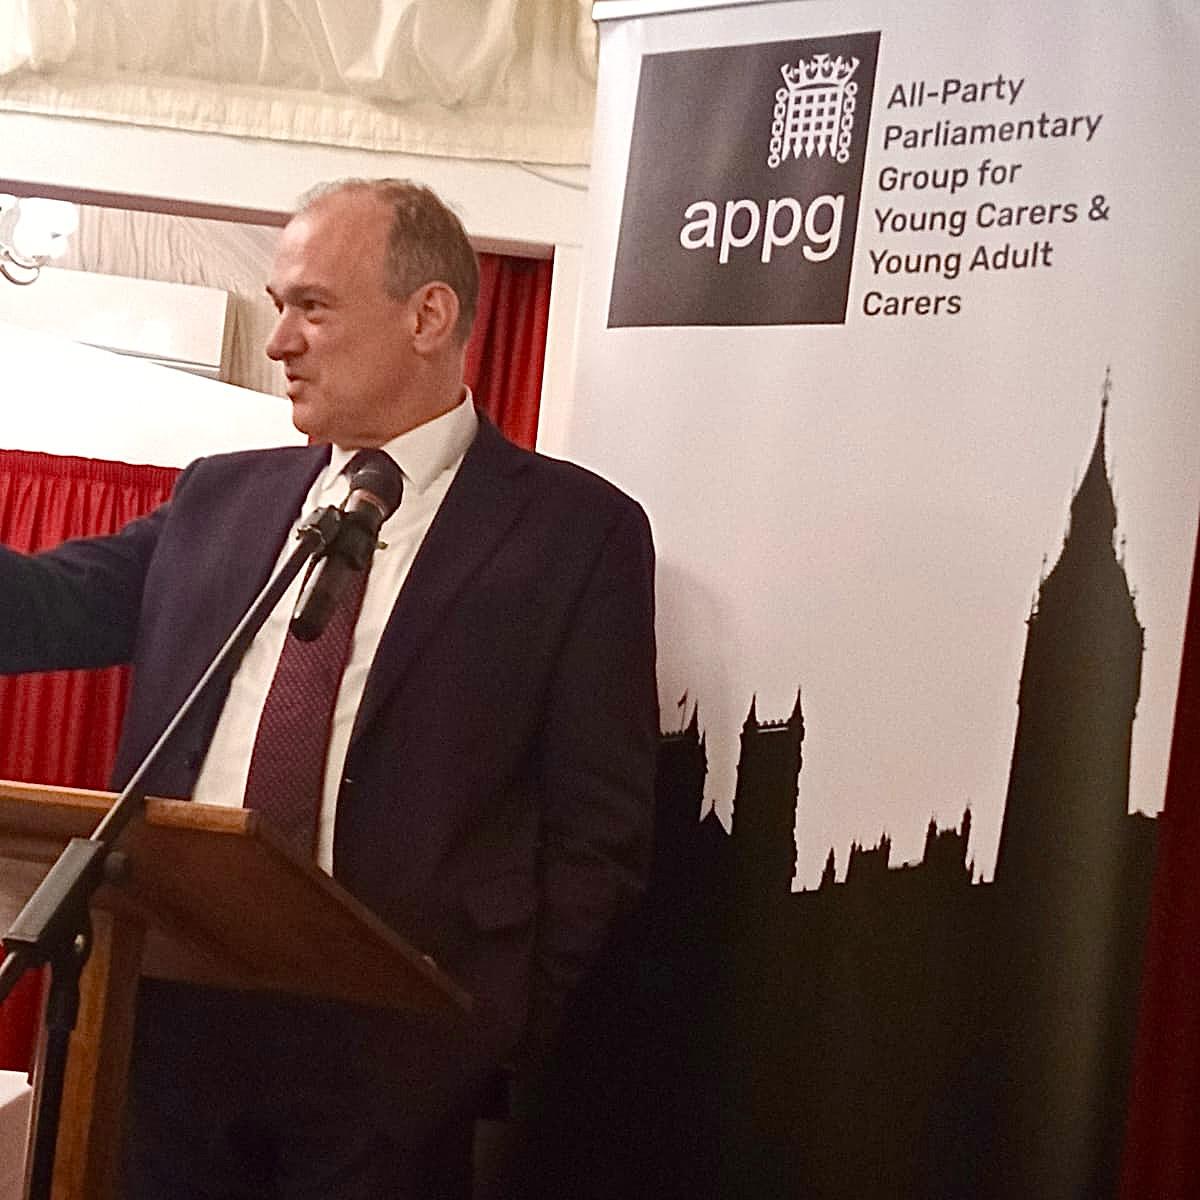 'We are still poor at identifying Young Carers early enough' @EdwardJDavey, leader of the Lib Dems picked up on the issue of identification of young carers at the launch of the APPG Inquiry report. Inquiry report: carers.org/APPGinquiry